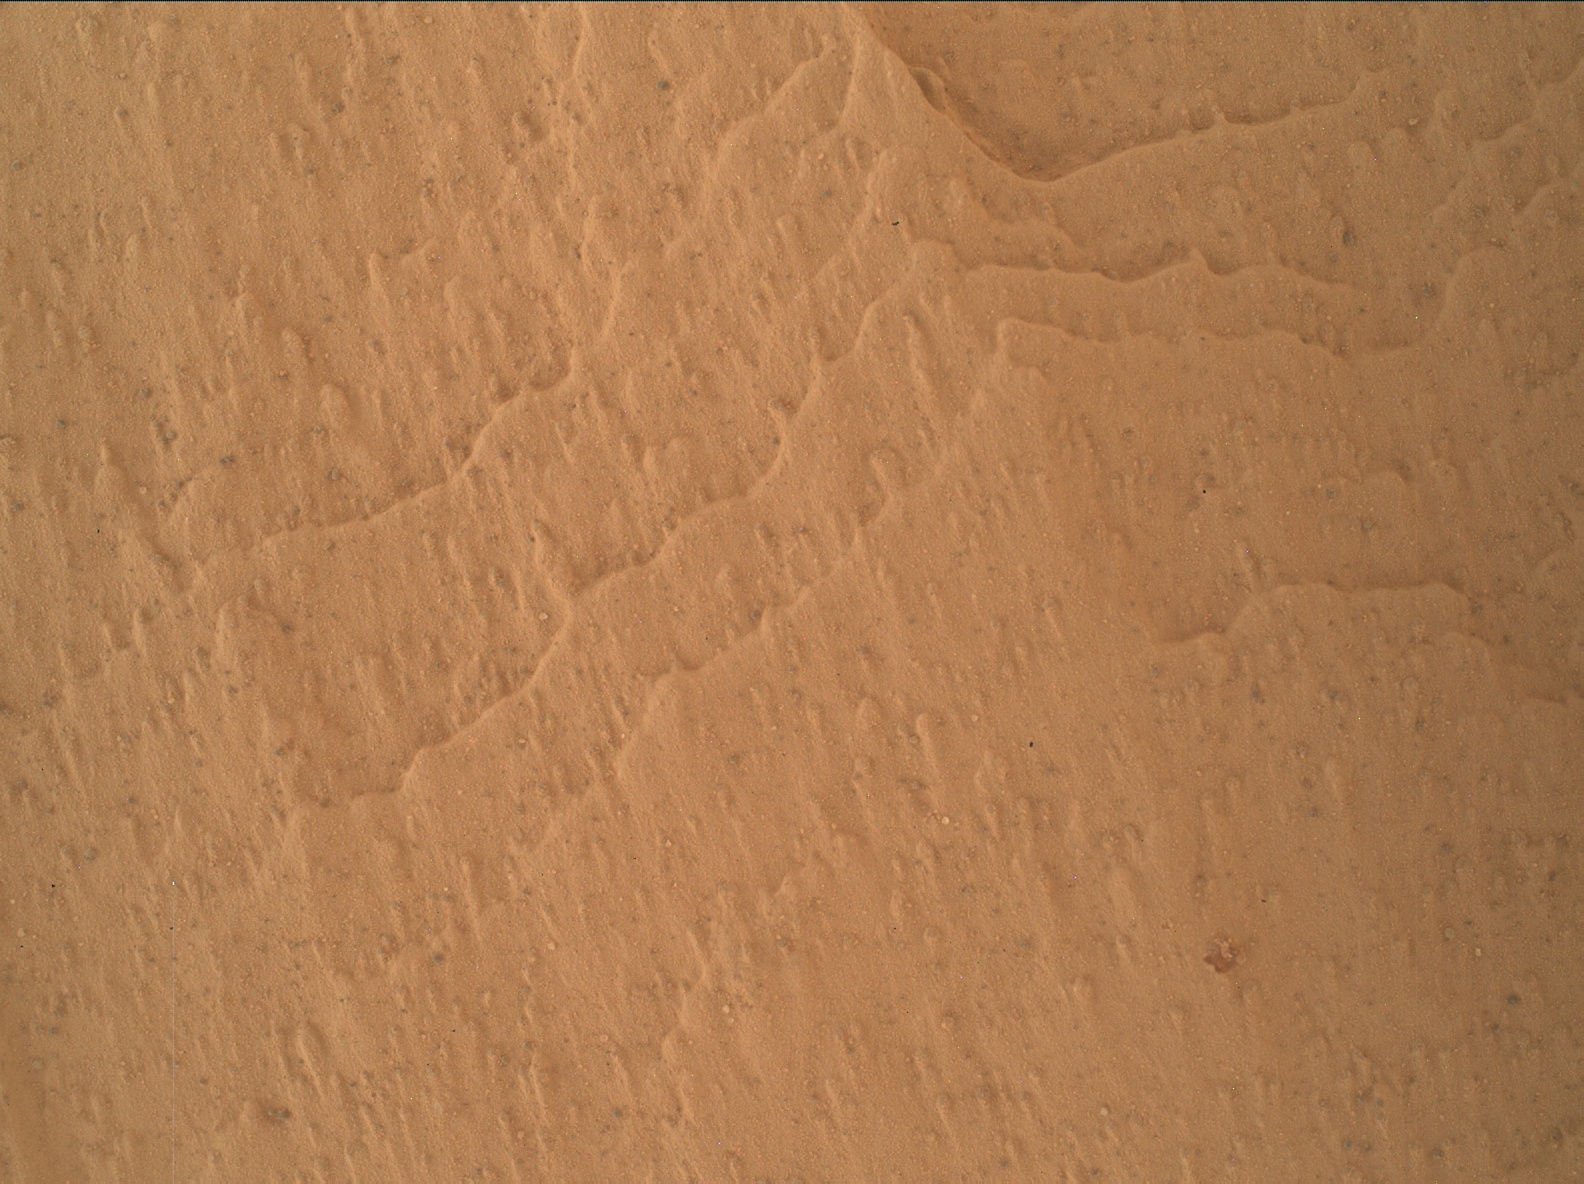 Nasa's Mars rover Curiosity acquired this image using its Mars Hand Lens Imager (MAHLI) on Sol 3286